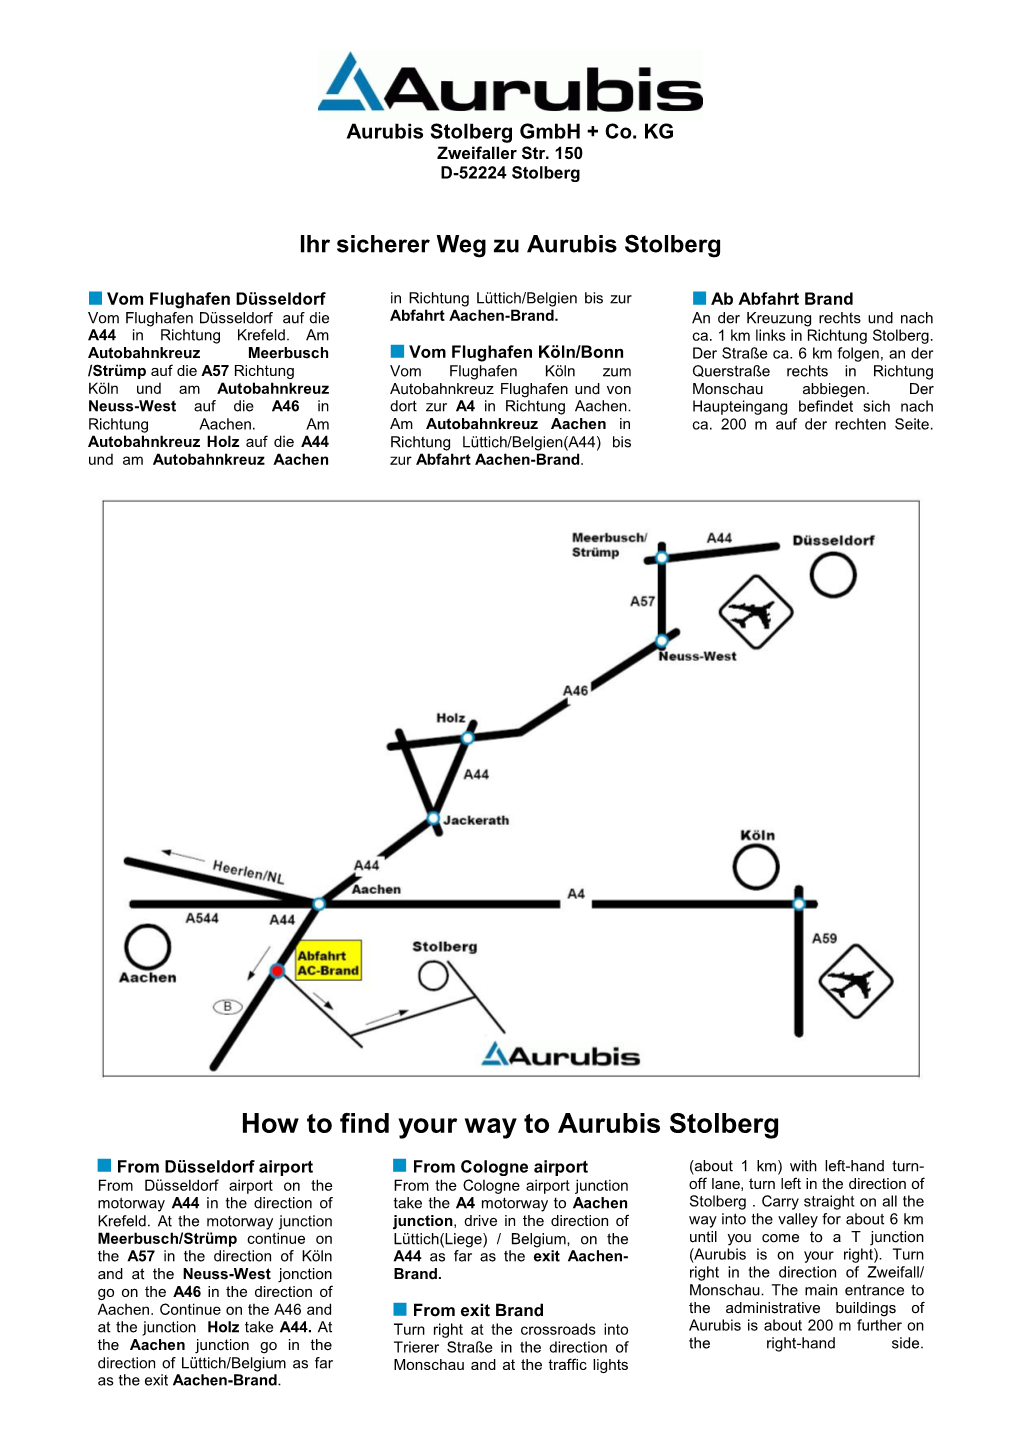 How to Find Your Way to Aurubis Stolberg